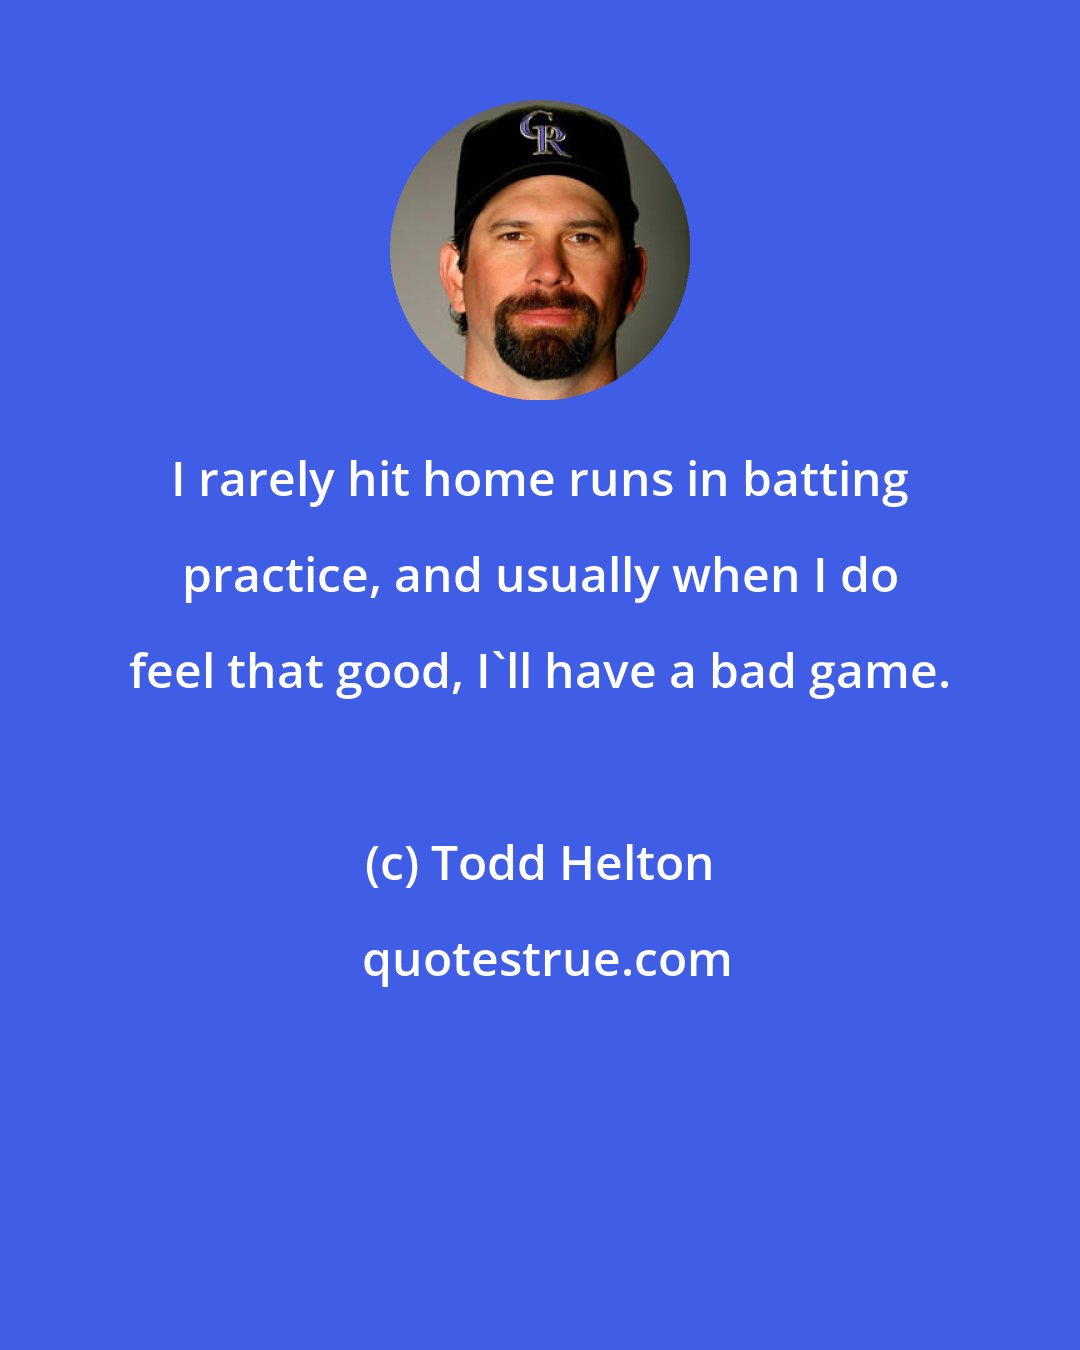 Todd Helton: I rarely hit home runs in batting practice, and usually when I do feel that good, I'll have a bad game.